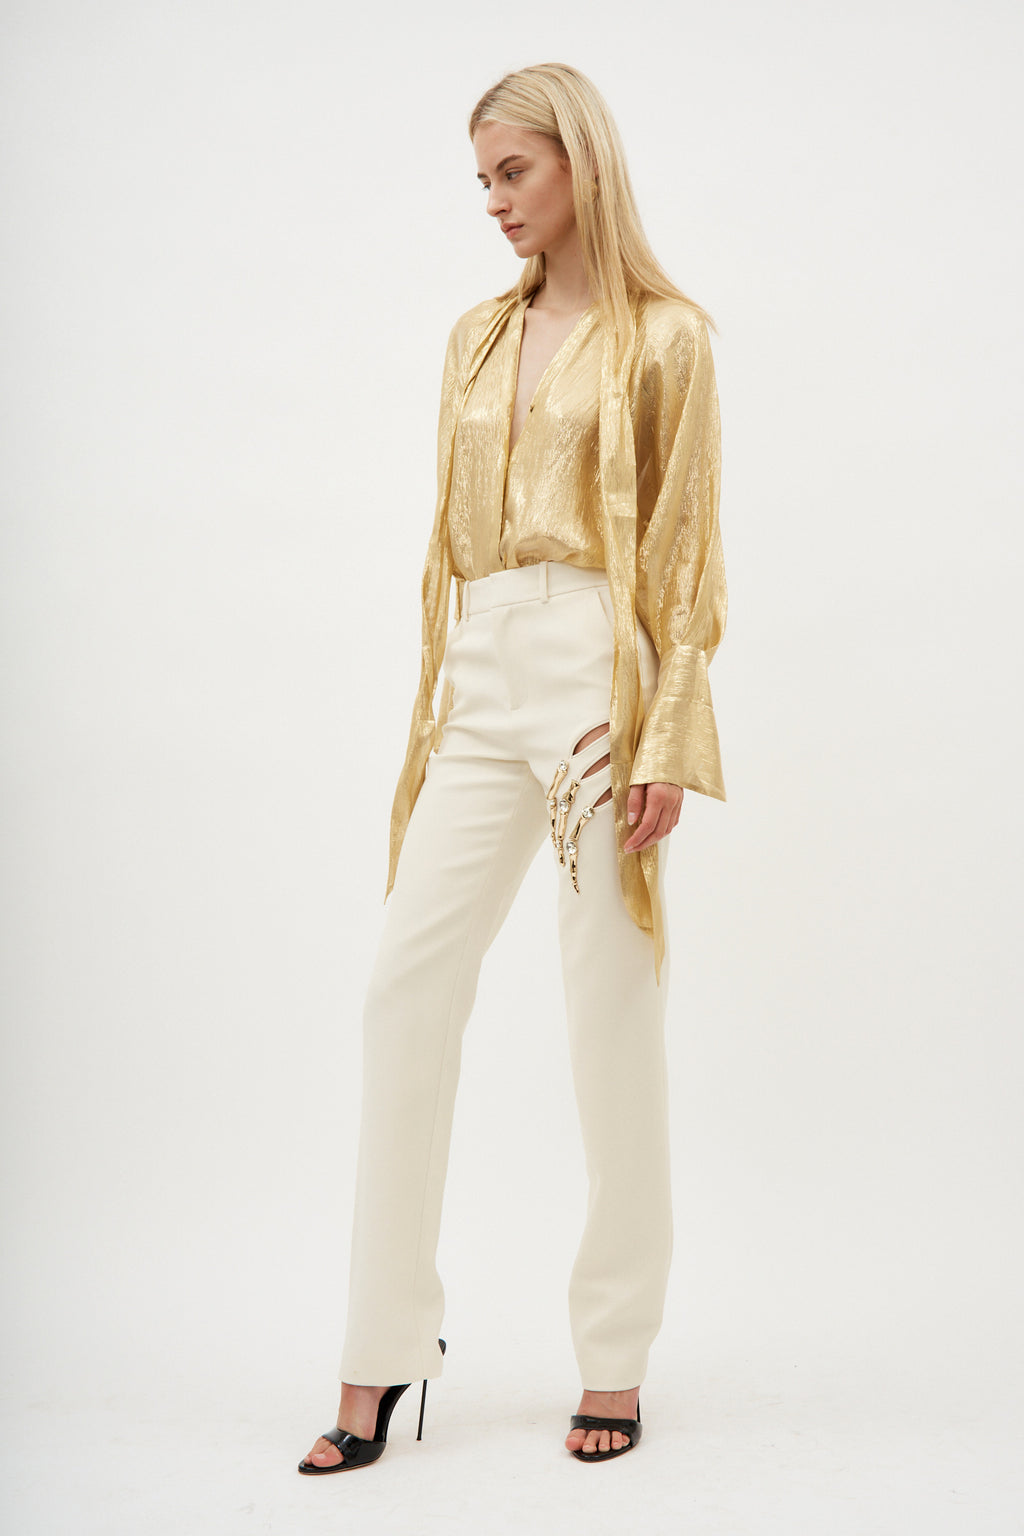 Claw Cutout Ivory Trouser